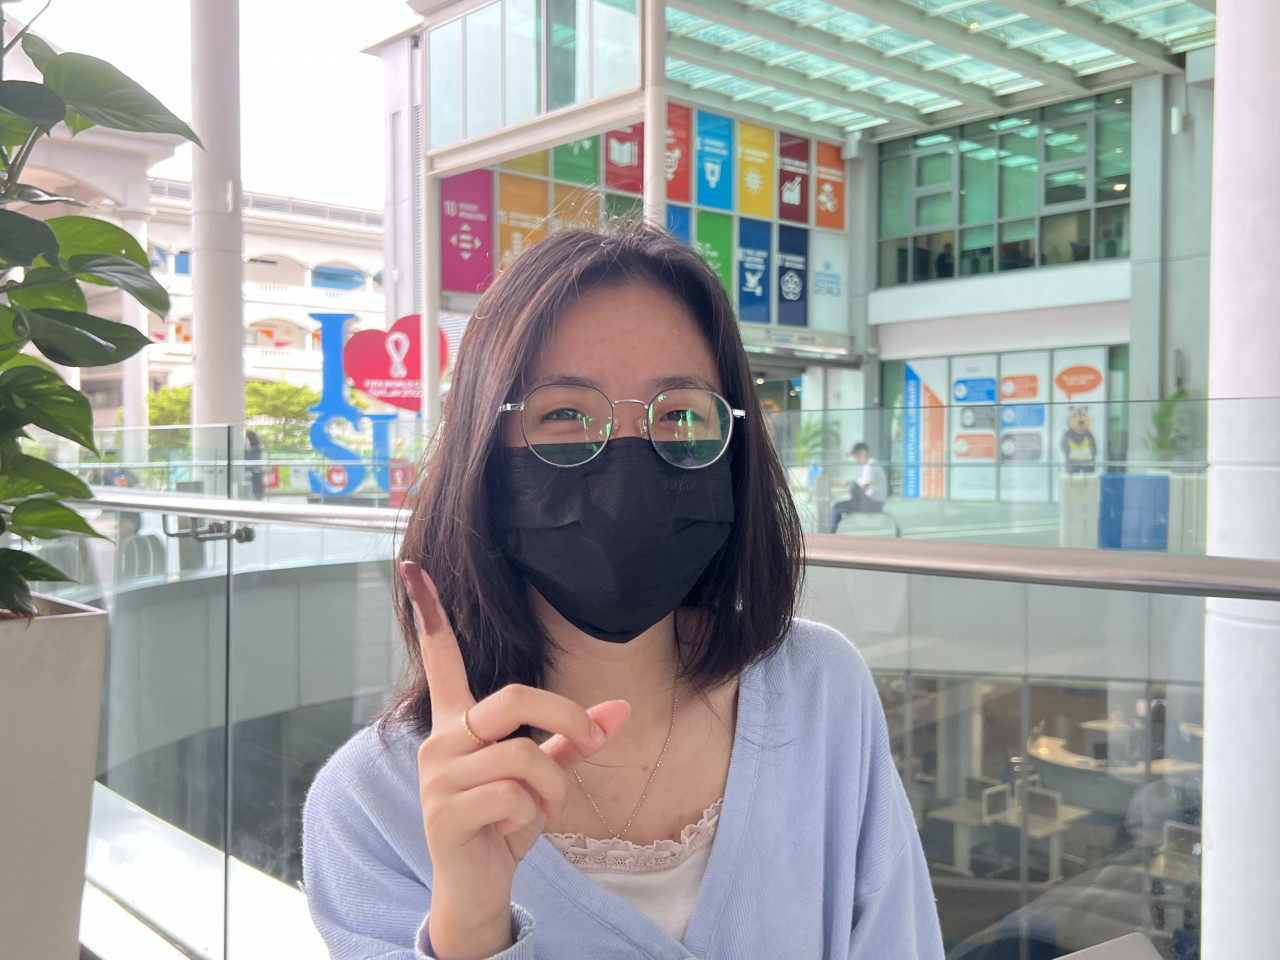 Yunice Leong, 19, mentions that she is nervous as there is currently no simple majority, leading to parties negotiating with each other which causes uncertainties. – ADAM AYZZAT/The Vibes pic, November 22, 2022